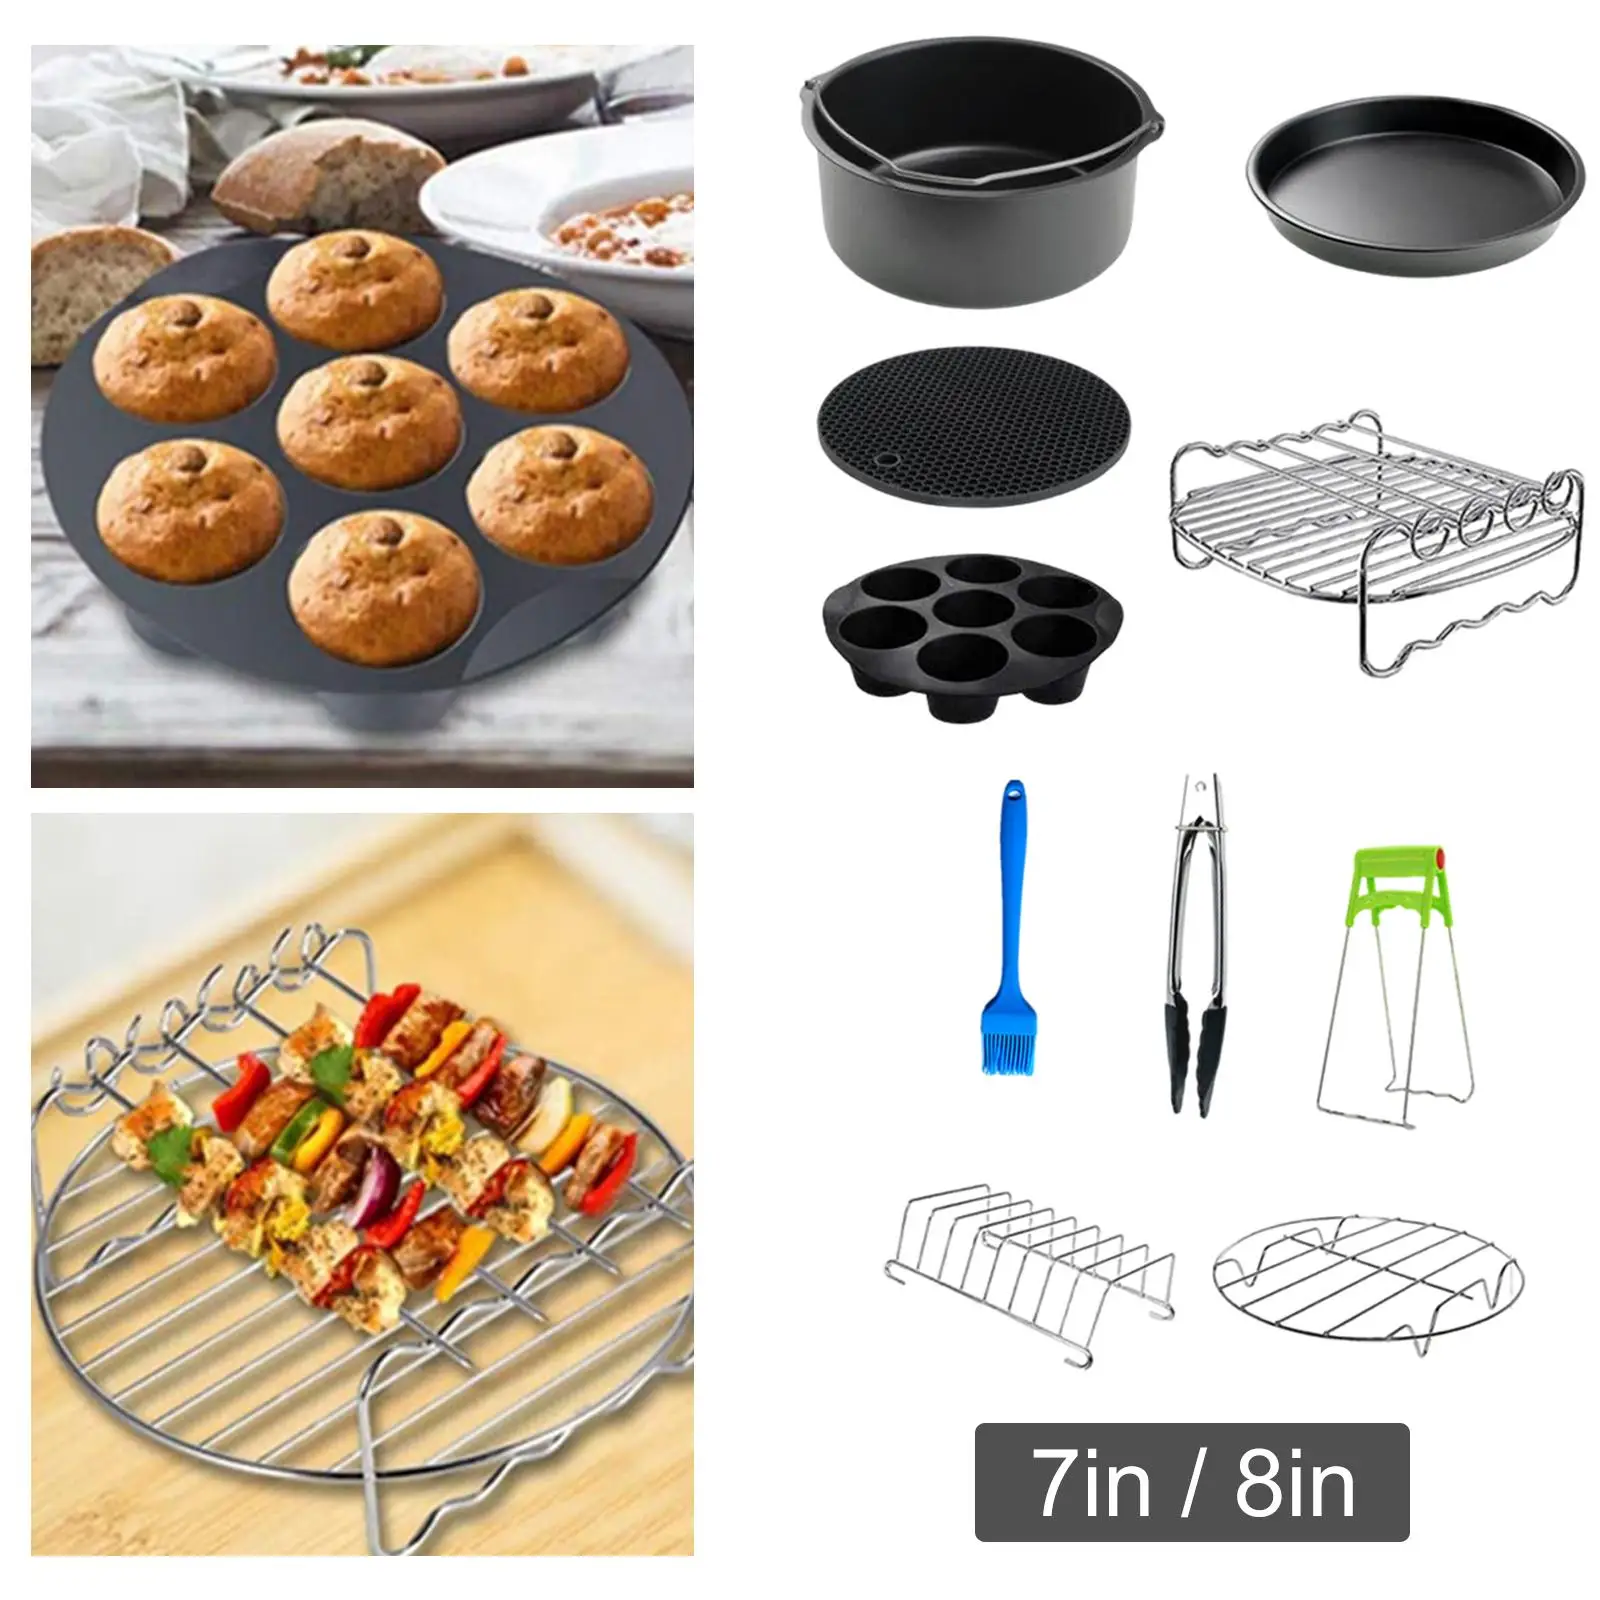 10 Pieces Air Fryer Accessories Set Cake Basket Hot Plate Gripper for Home Kitchen